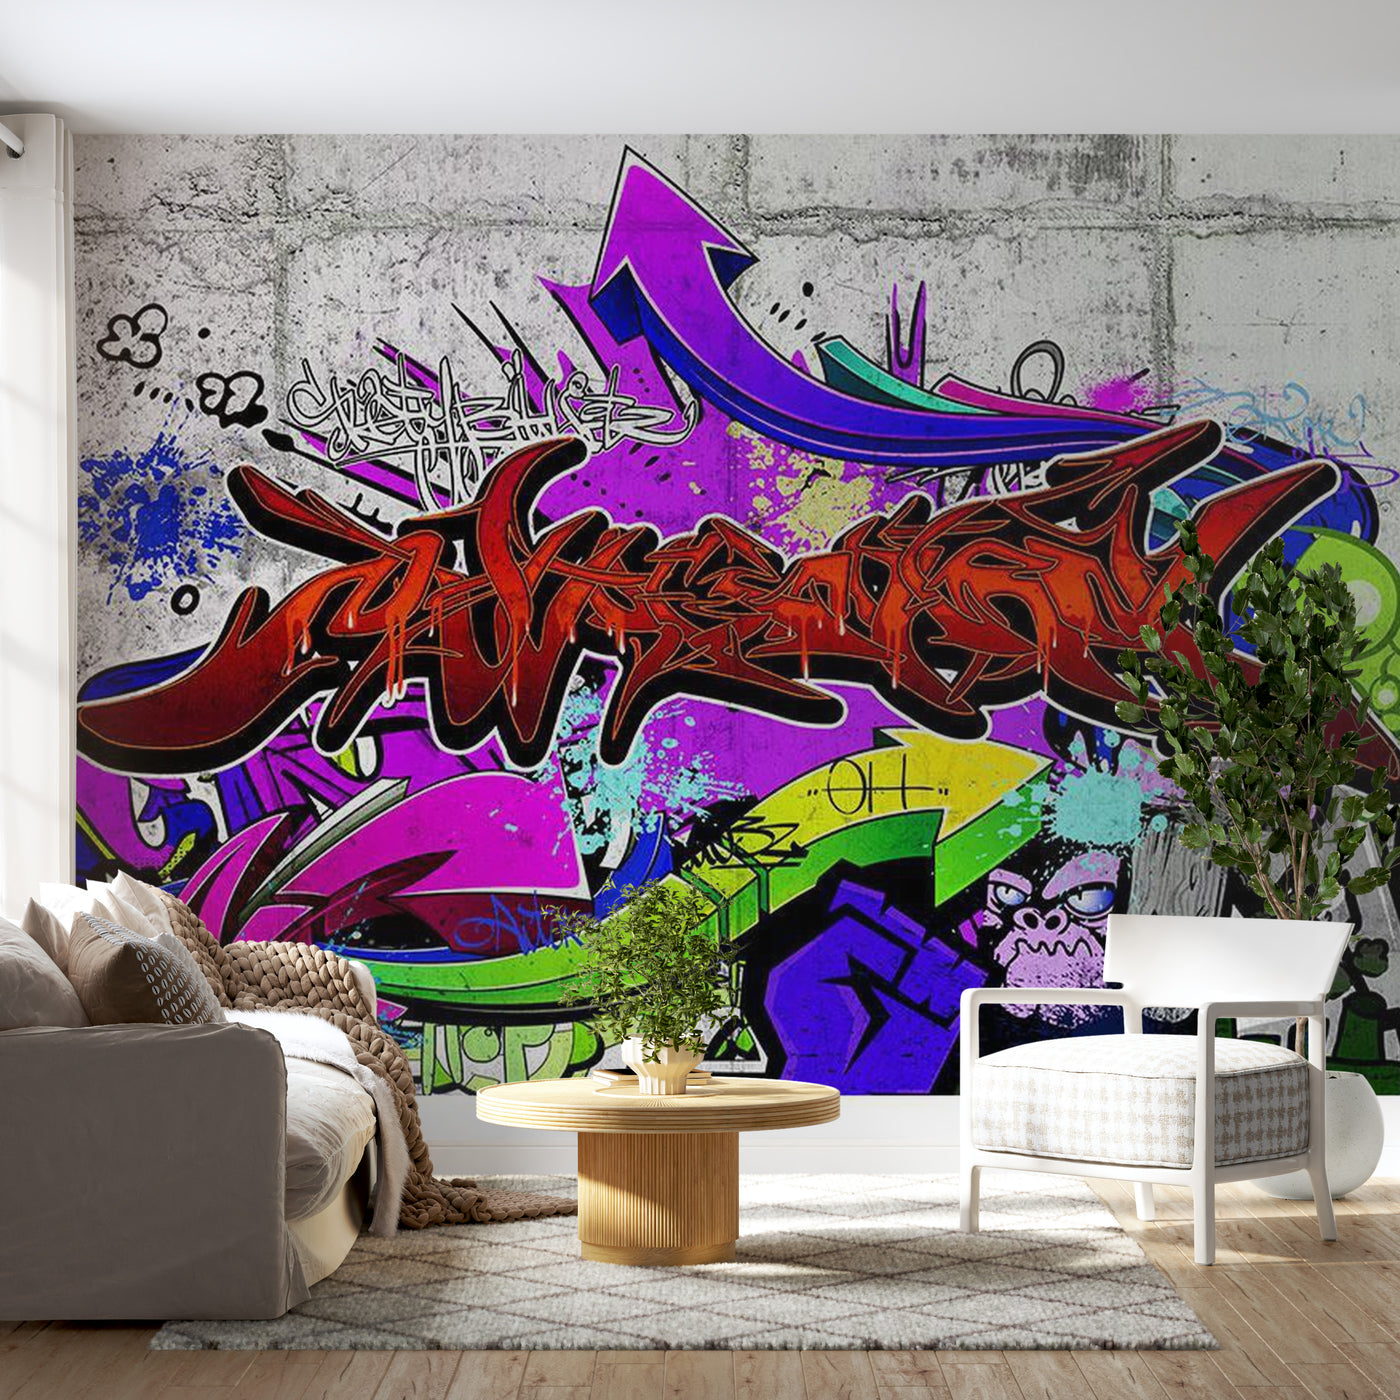 Peel & Stick Street Art Wall Mural - City Style Graffiti - Removable Wall Decals